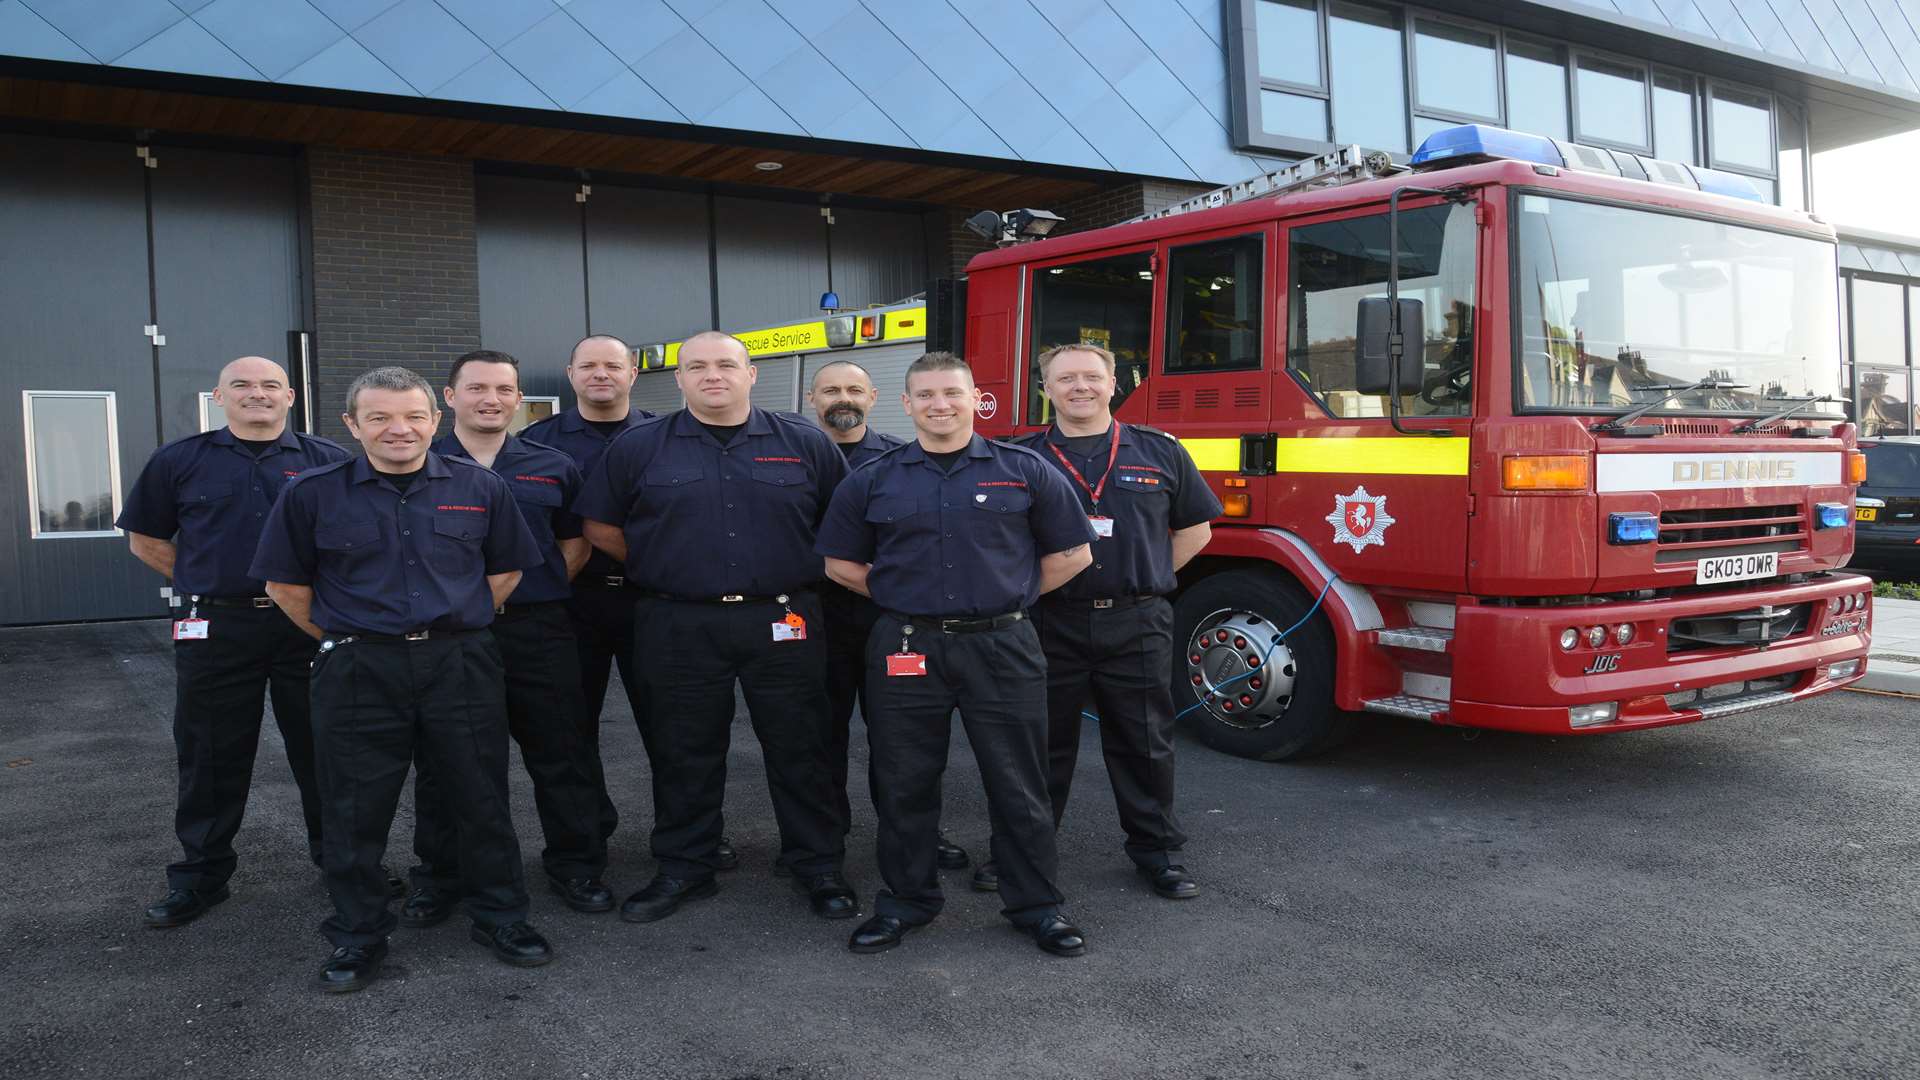 The crew at Chatham's new fire station in Watling Street.